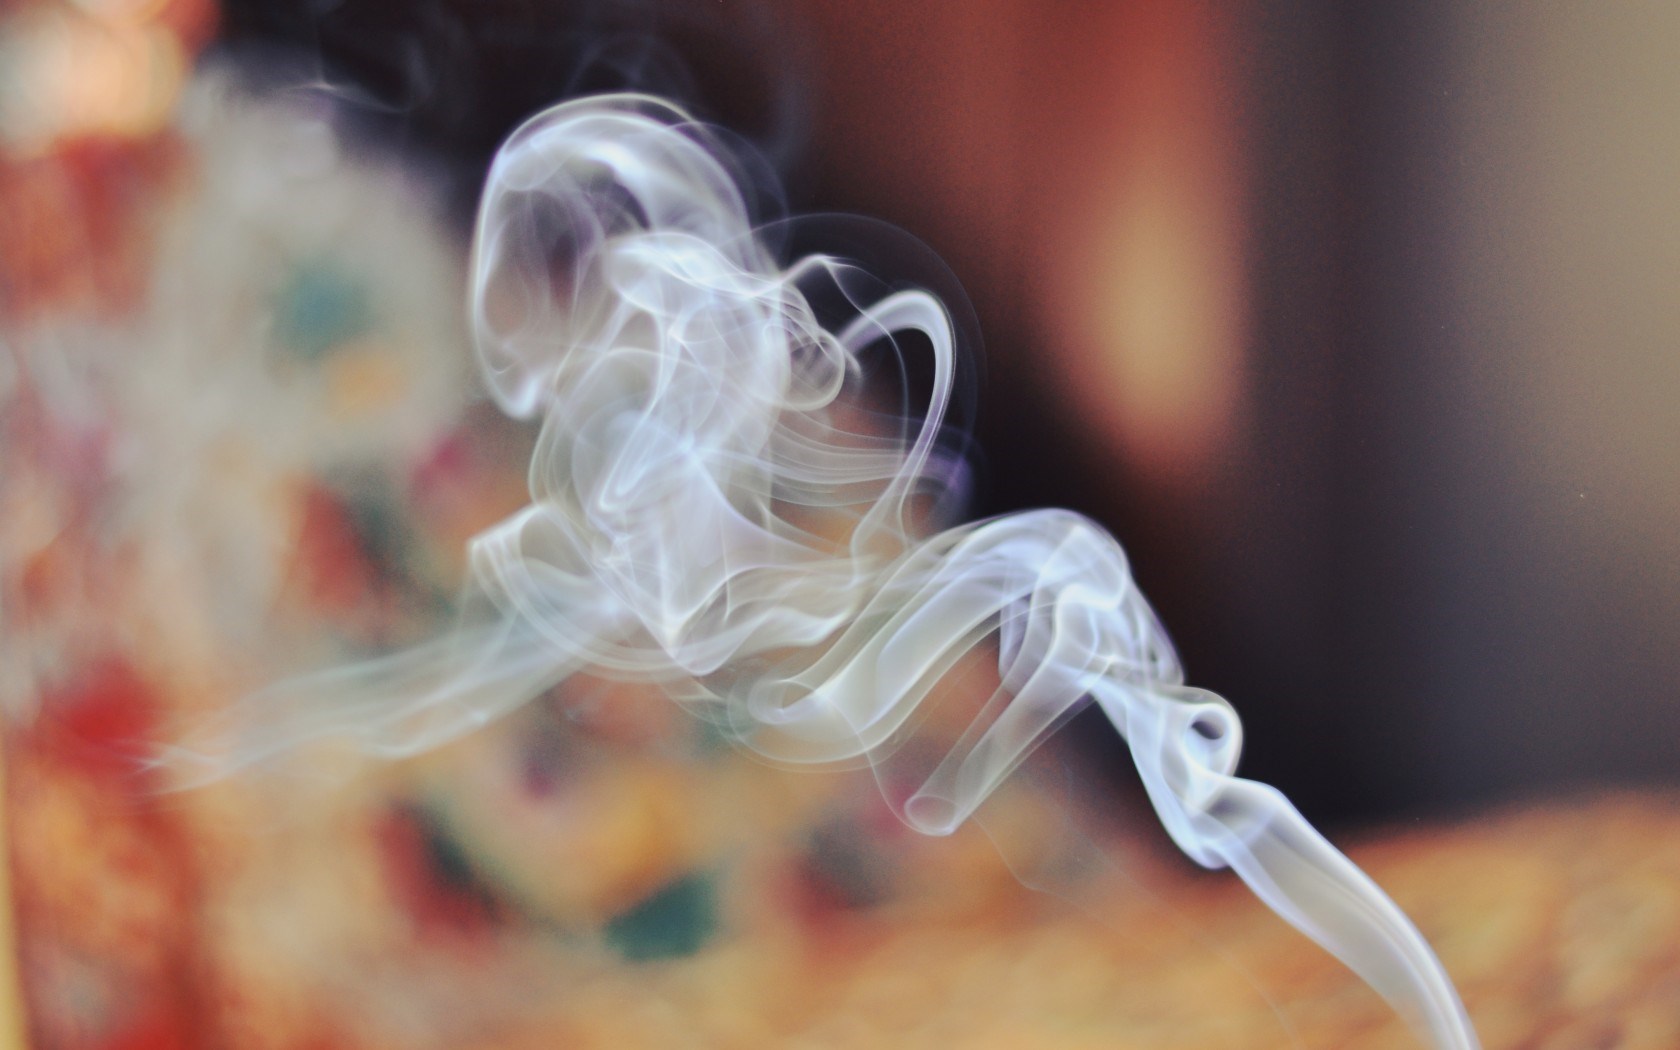  form below to delete this magic smoke wallpaper image from our index